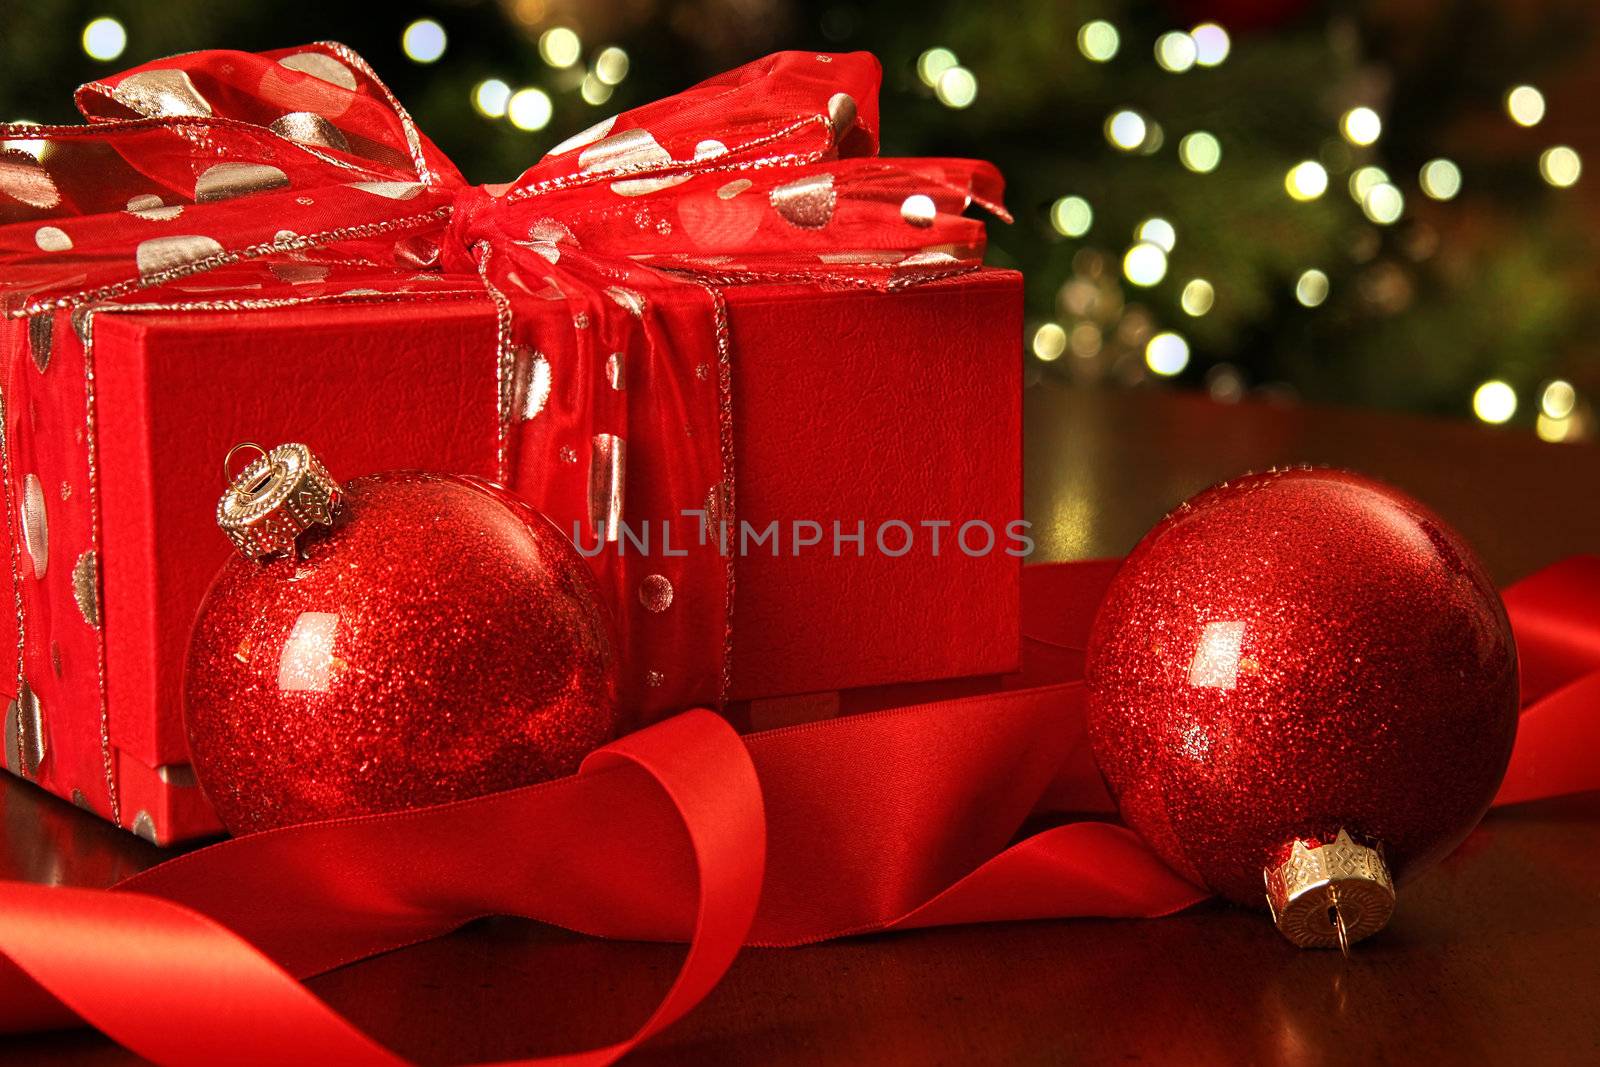 Red Christmas gift with ornaments by Sandralise